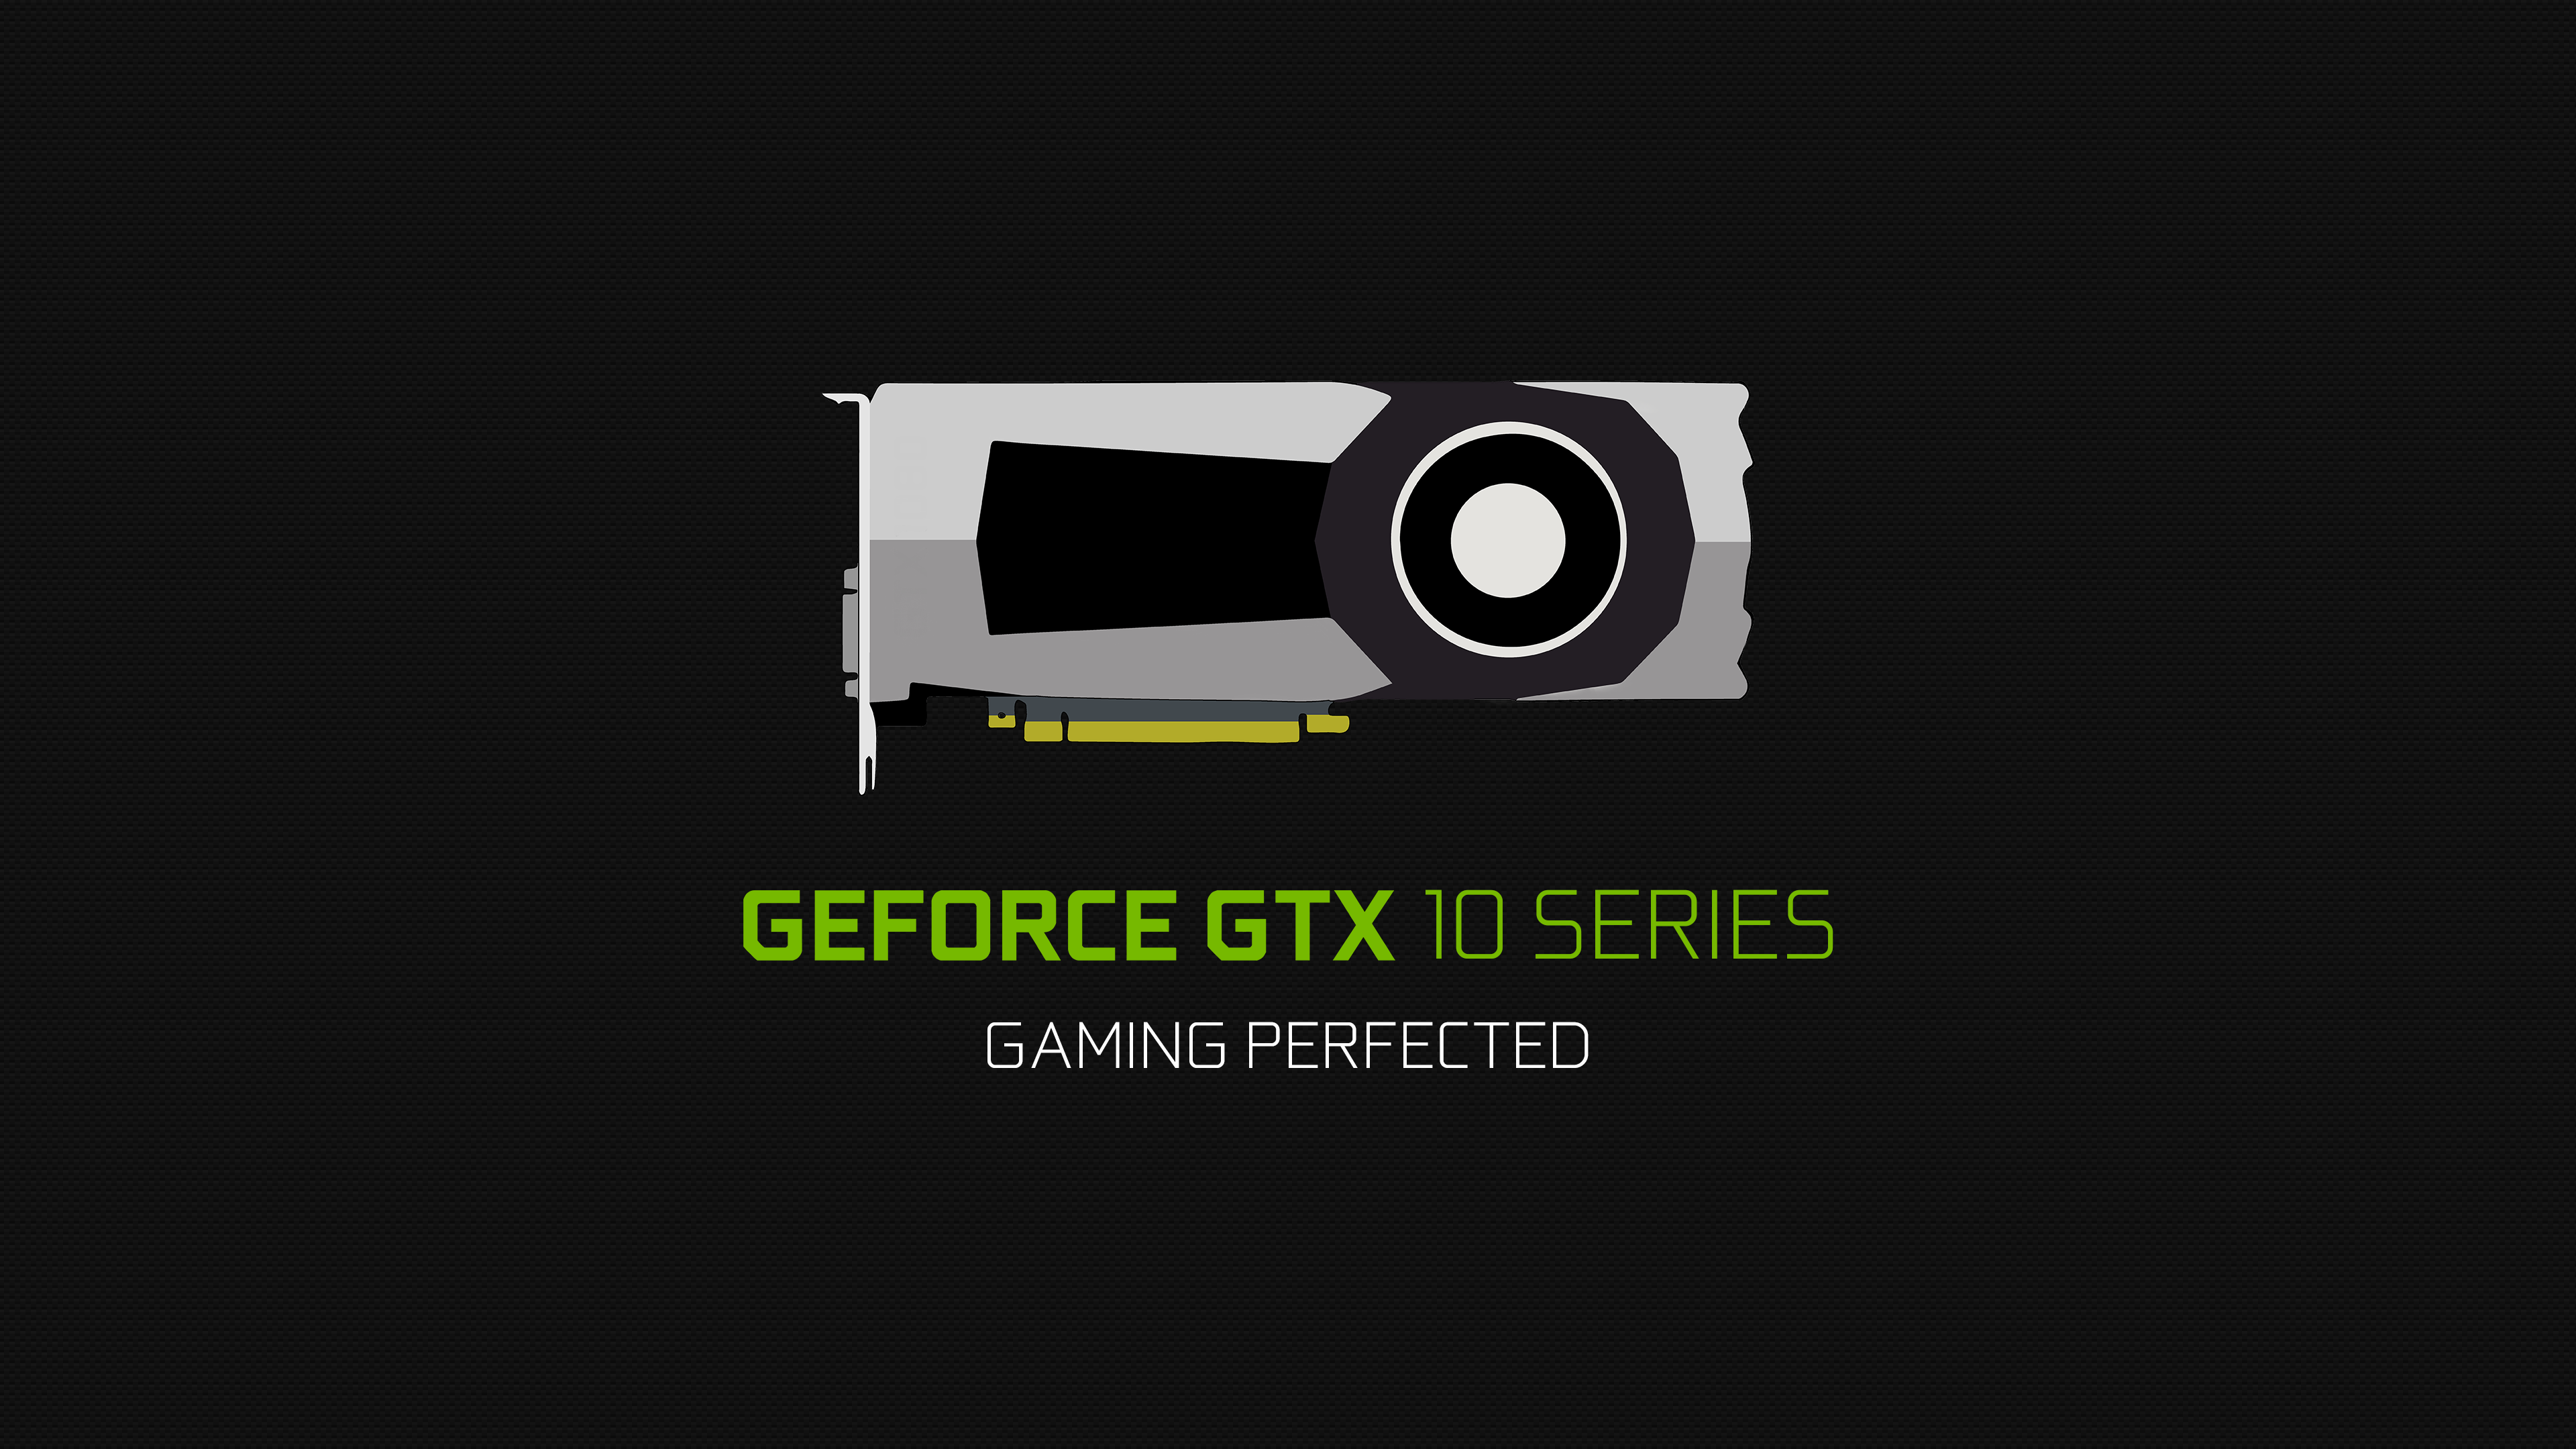 General 3840x2160 Nvidia GPUs texture minimalism hardware technology PC gaming computer simple background black background